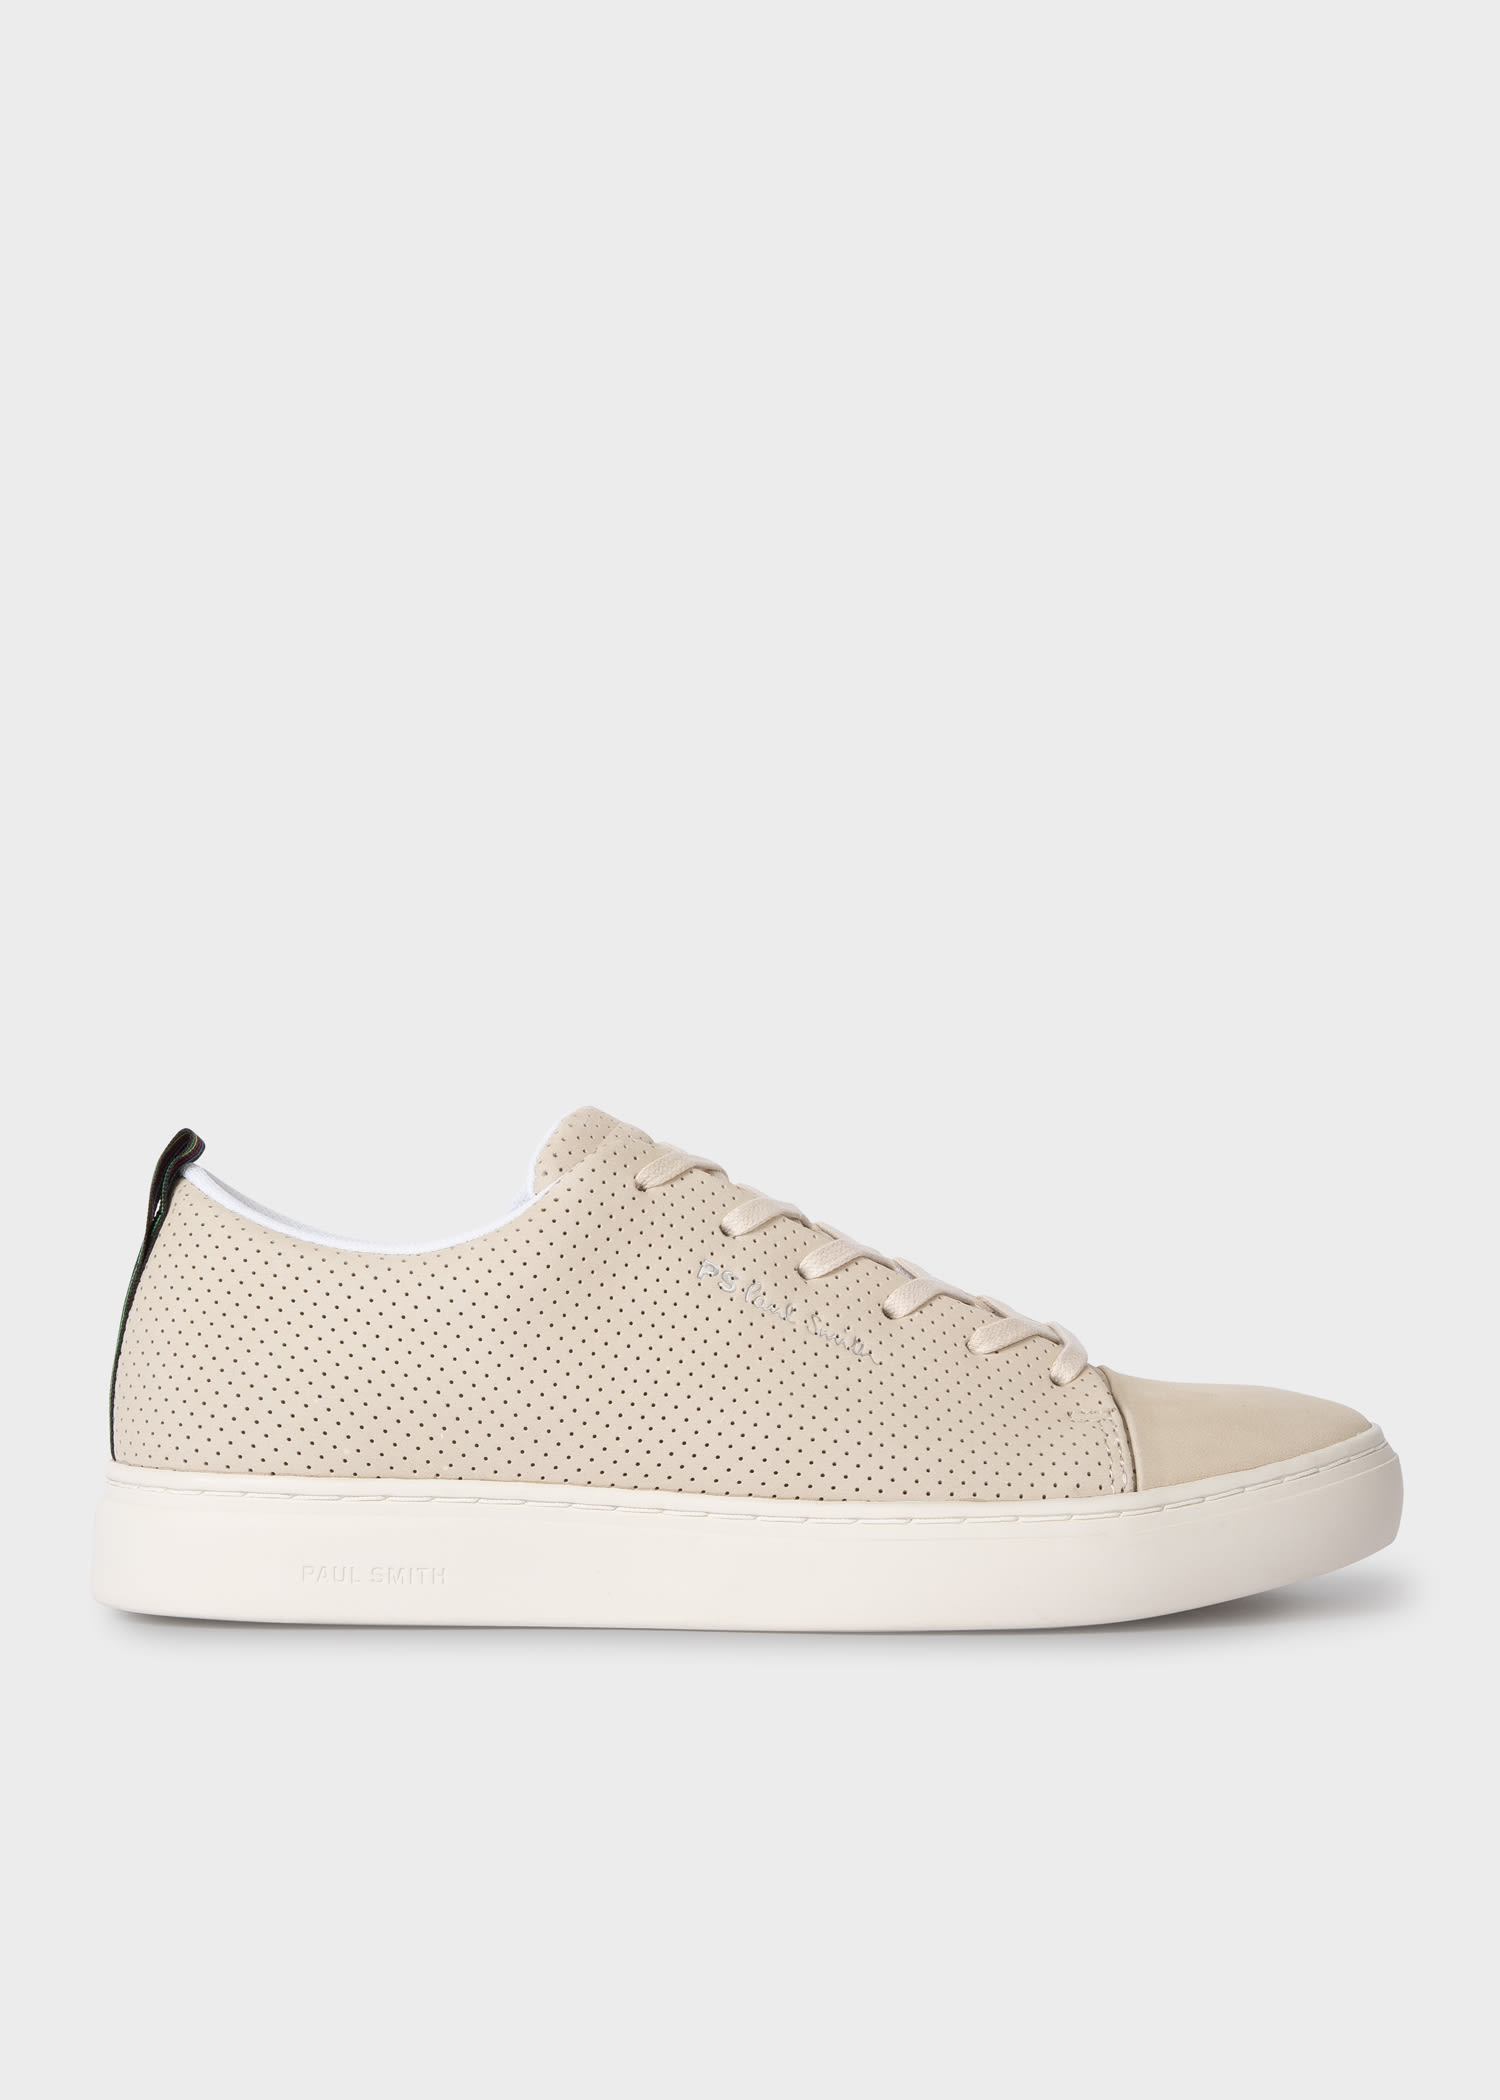 Men's White Leather 'Lee' Trainers - Paul Smith